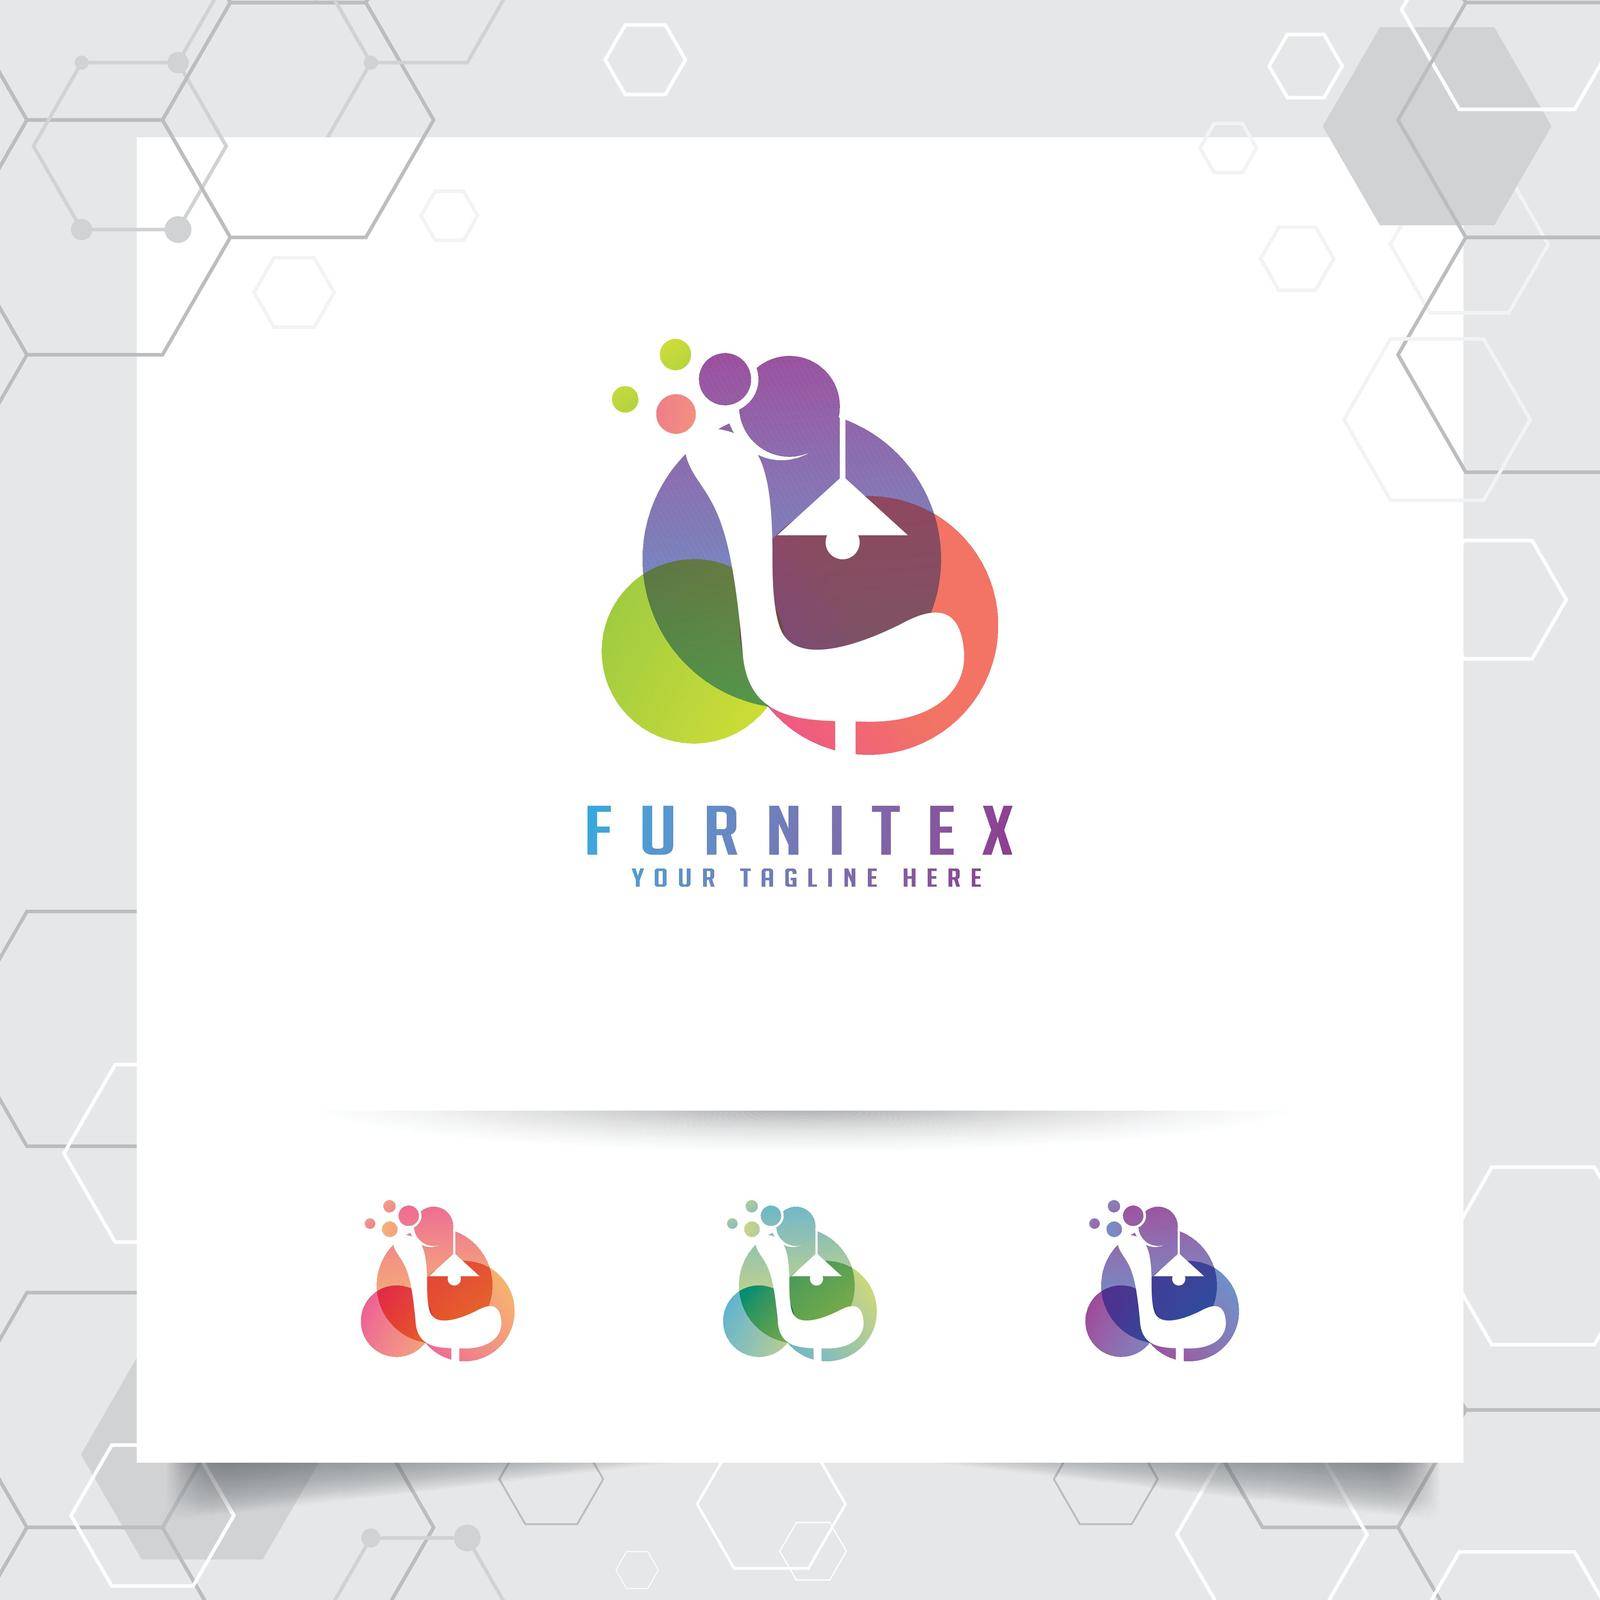 Furniture logo design vector with a negative space chair sofa icon illustration for home furnishing, interior architecture and gallery. by BiruMuda